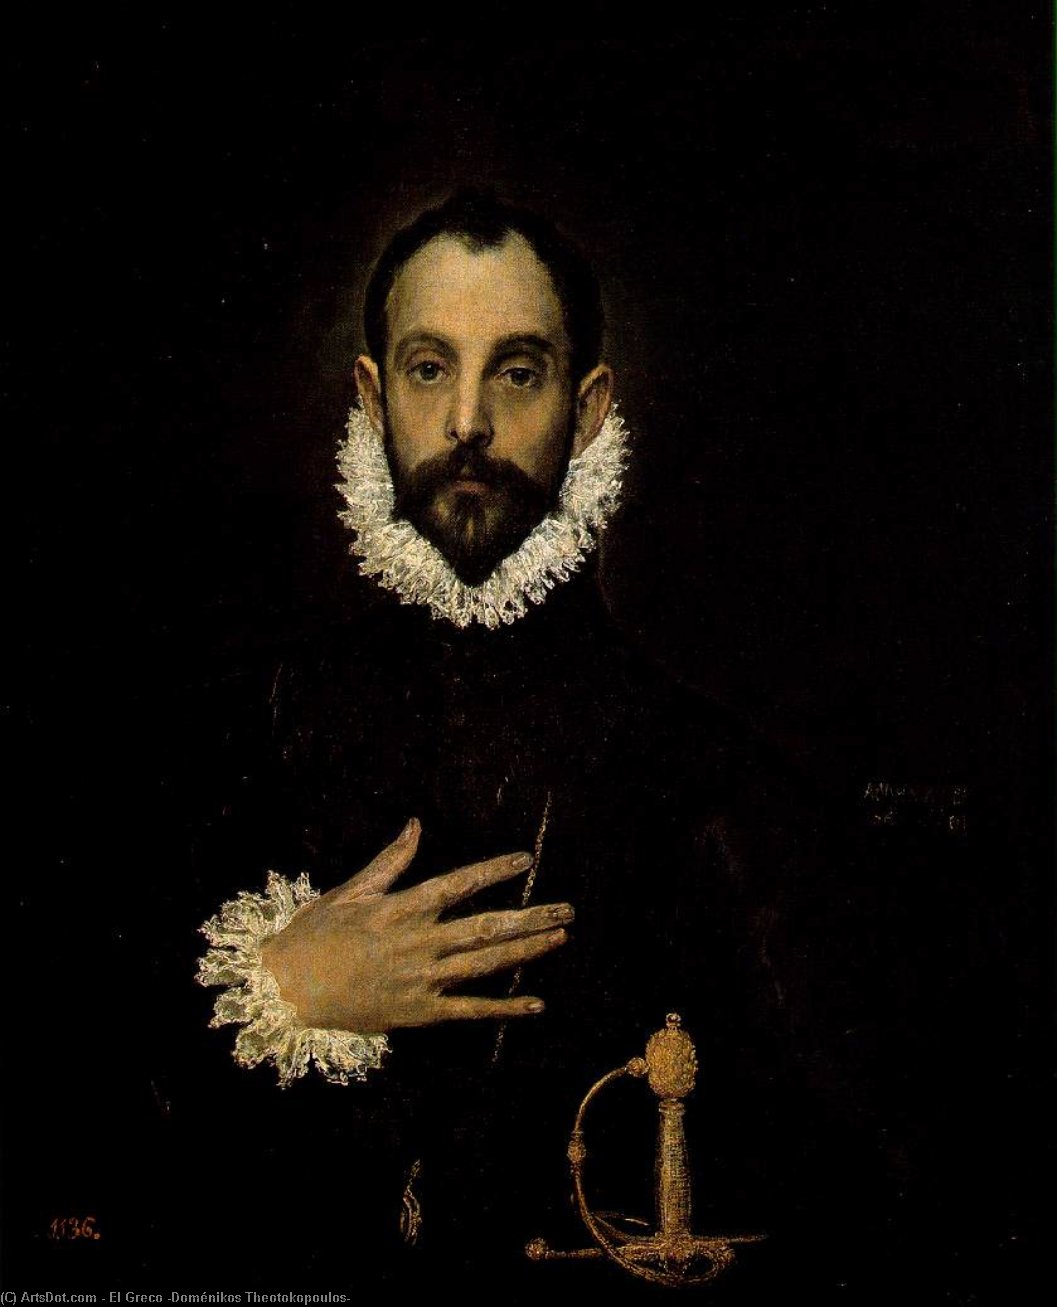 WikiOO.org - Encyclopedia of Fine Arts - Festés, Grafika El Greco (Doménikos Theotokopoulos) - Portrait of a Nobleman with His Hand on His Chest